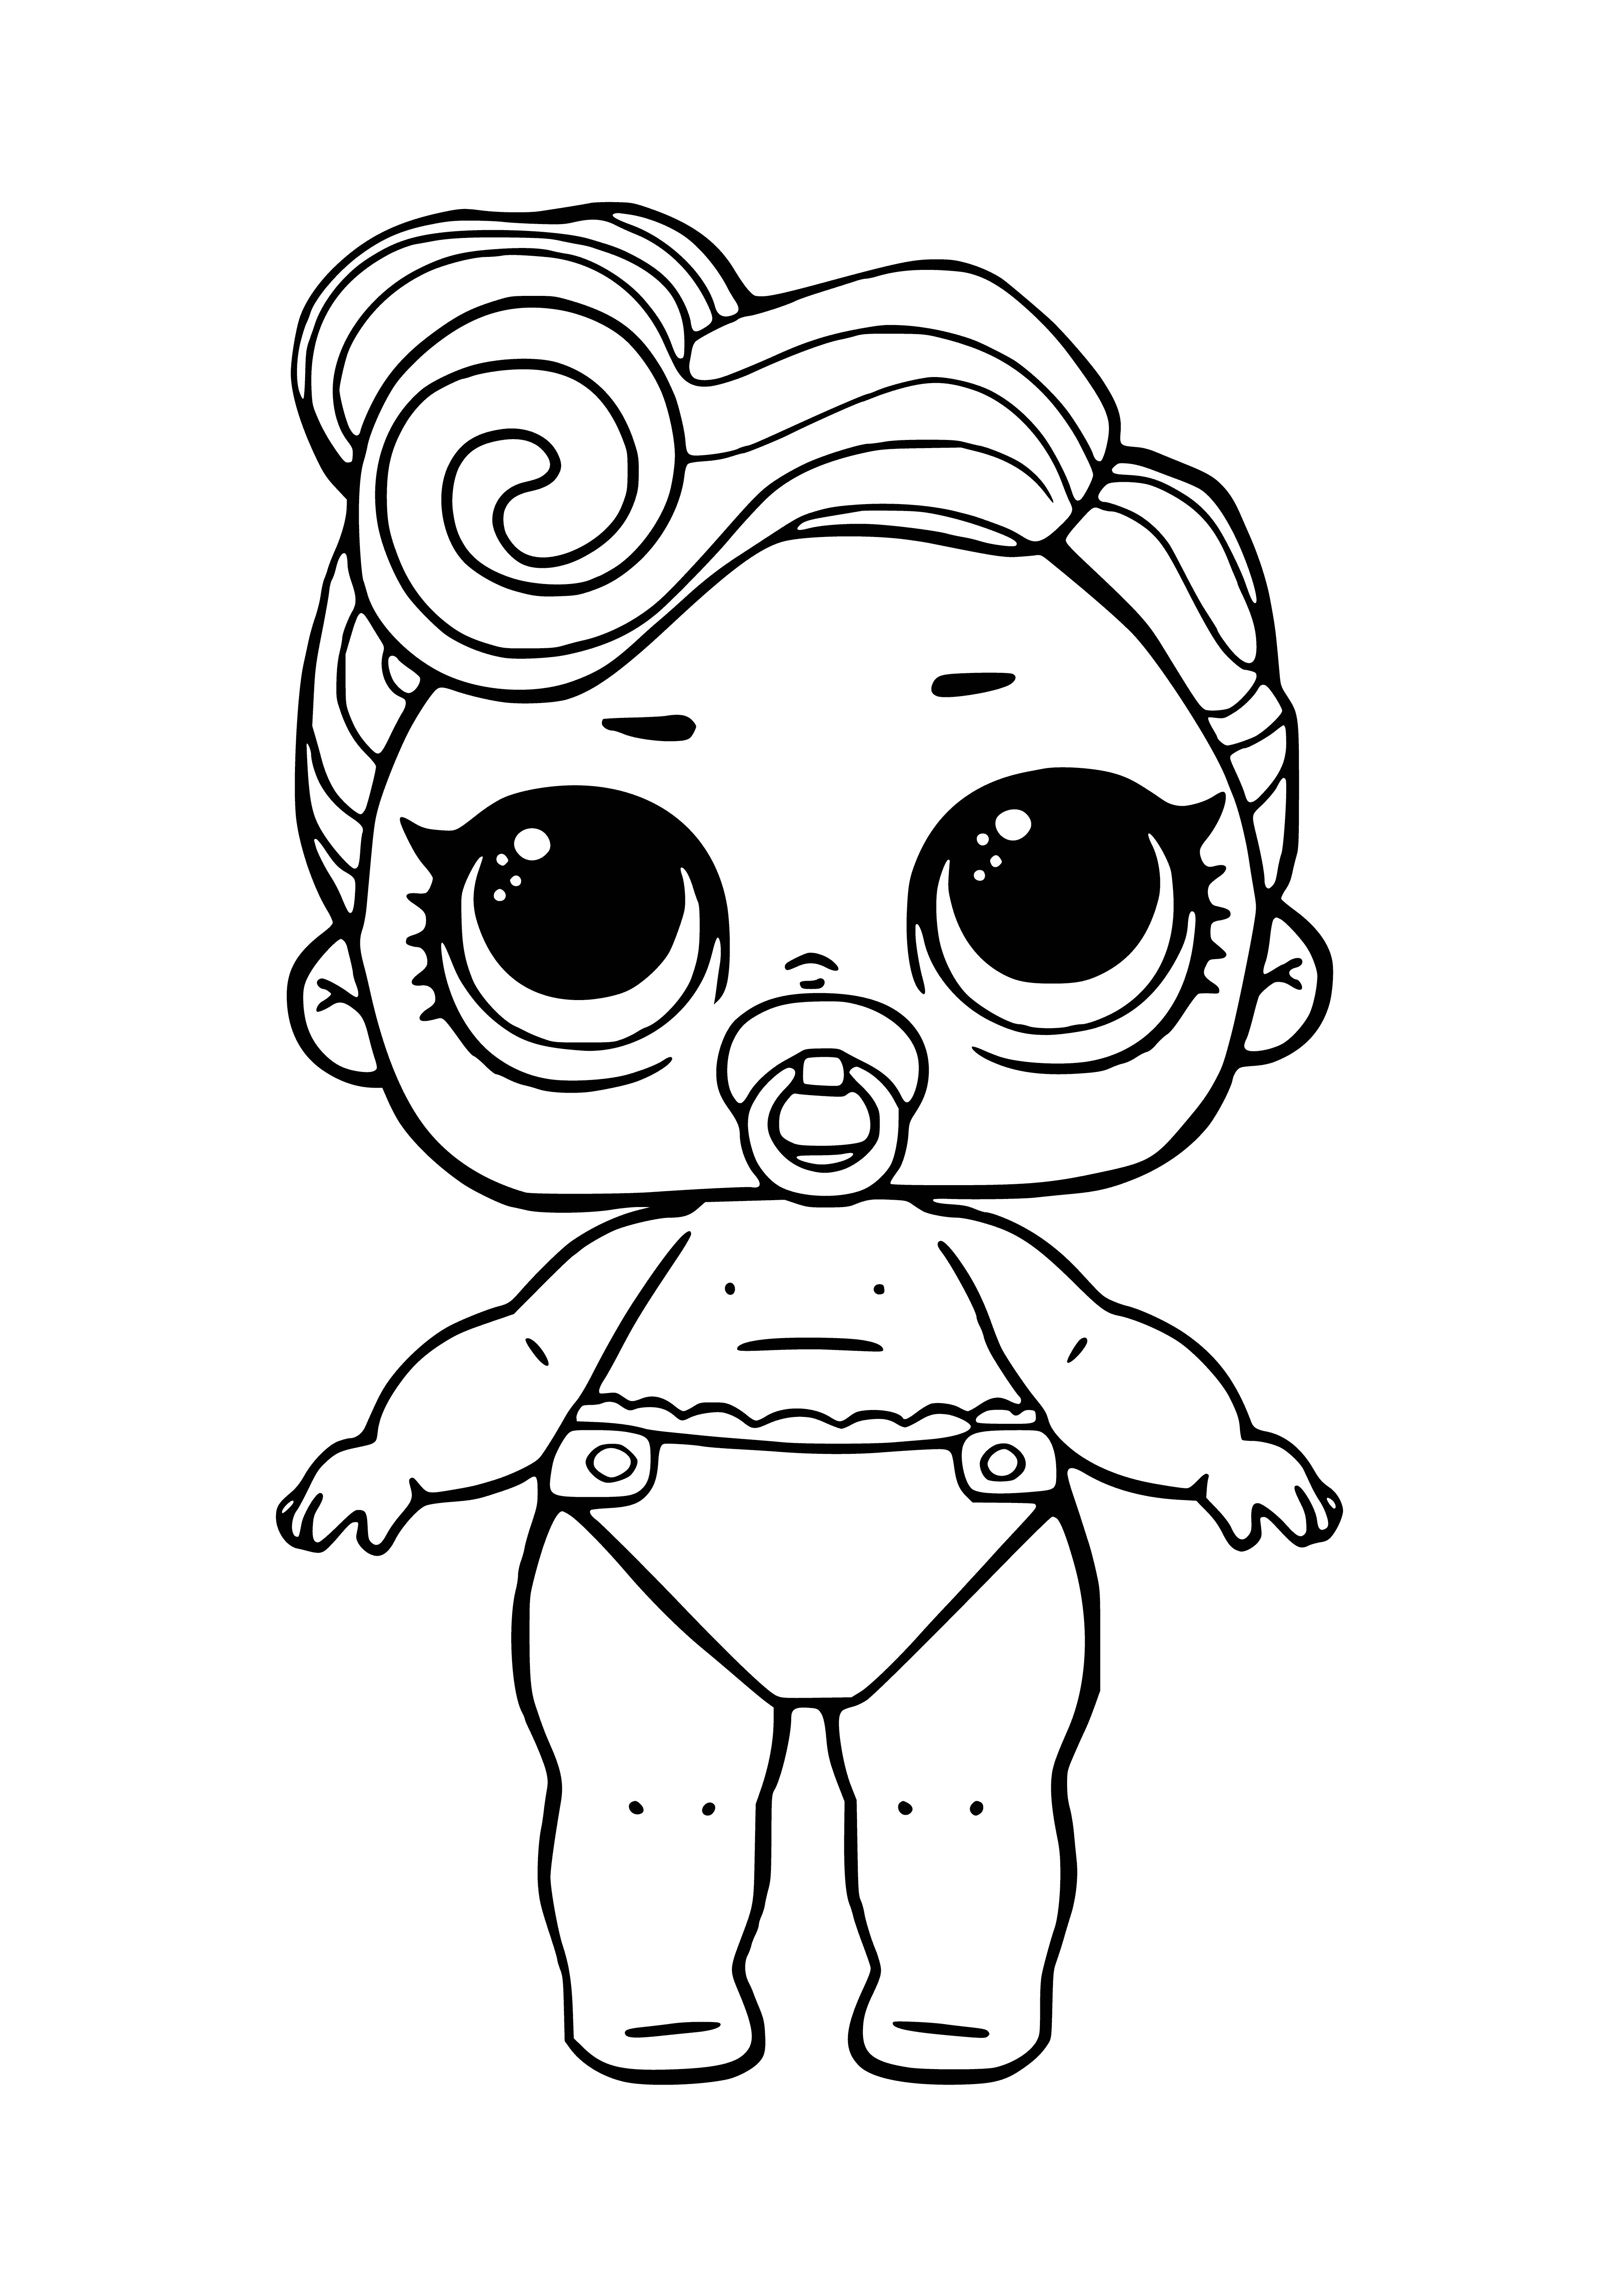 coloring page: Black baby with curly hair and brown eyes wearing a pink & black tutu & black top - the LOl baby Diva!